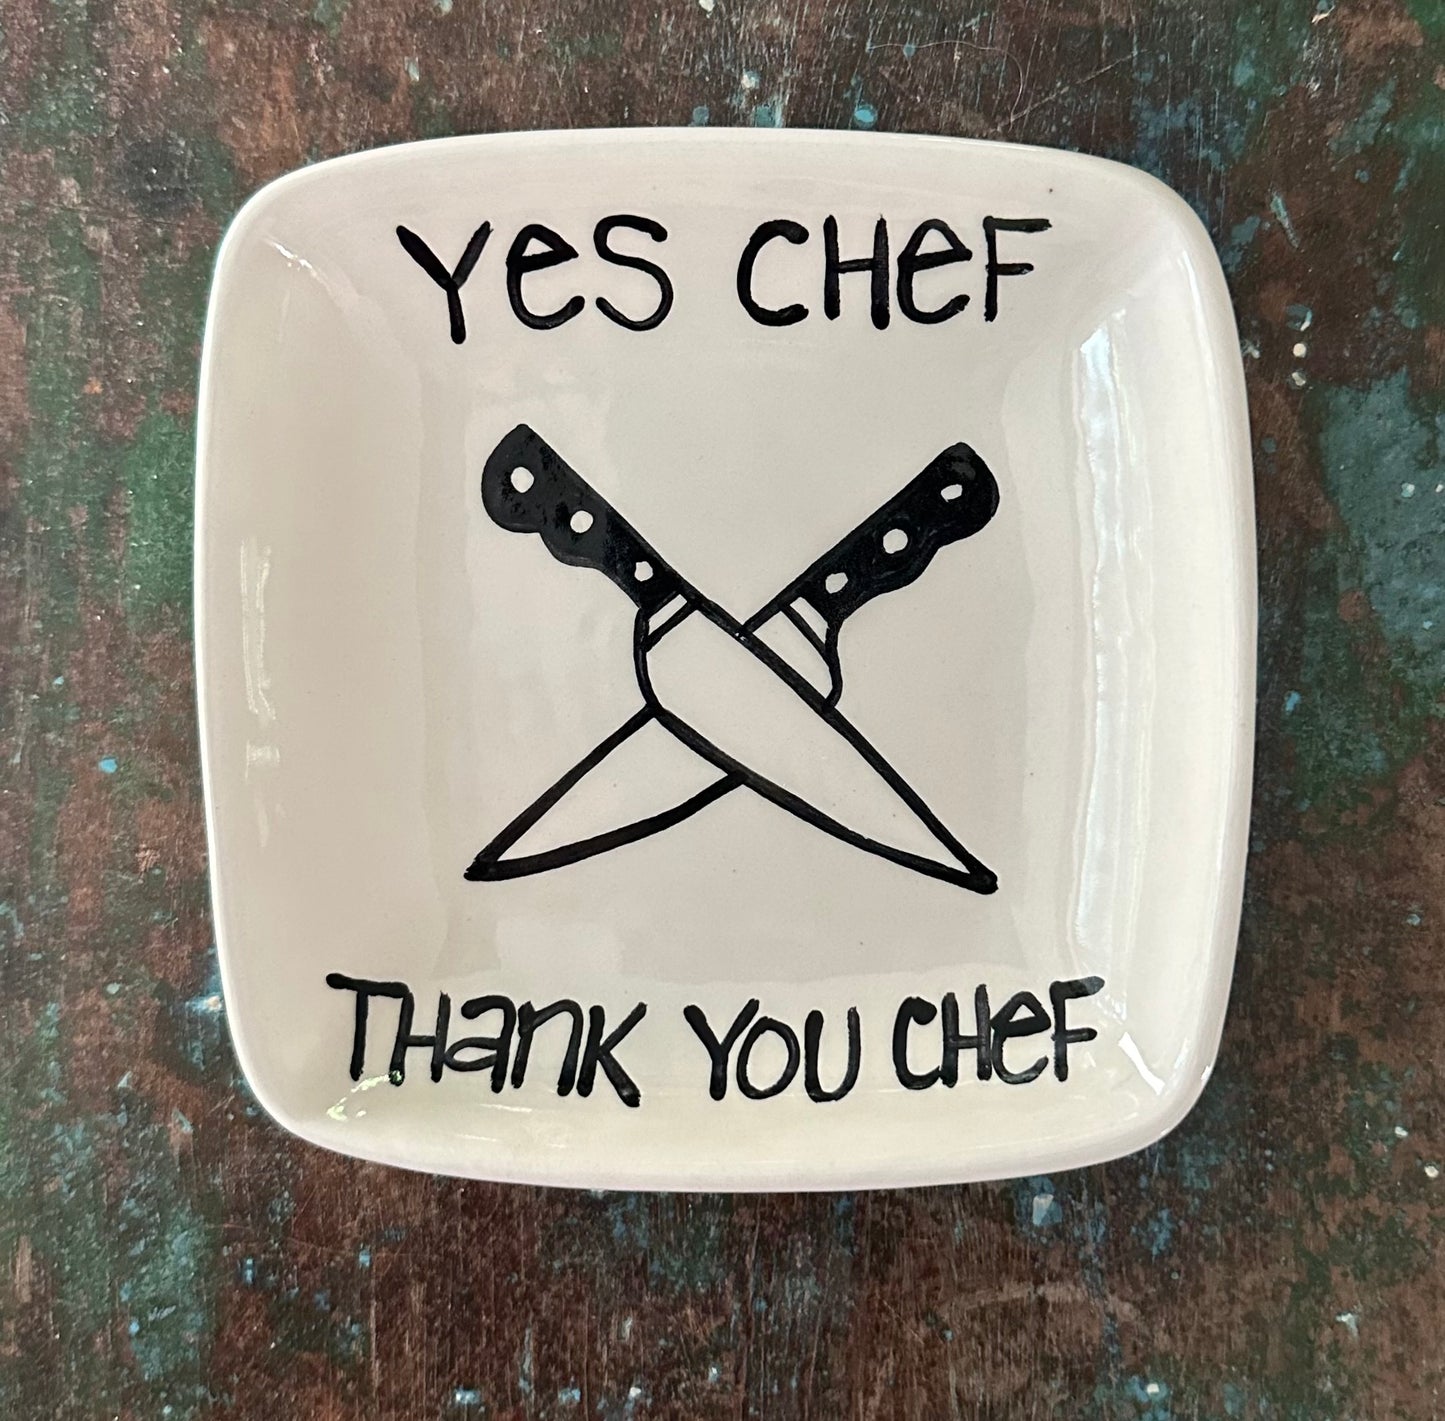 Trinket Dish “Yes Chef Thank You Chef”